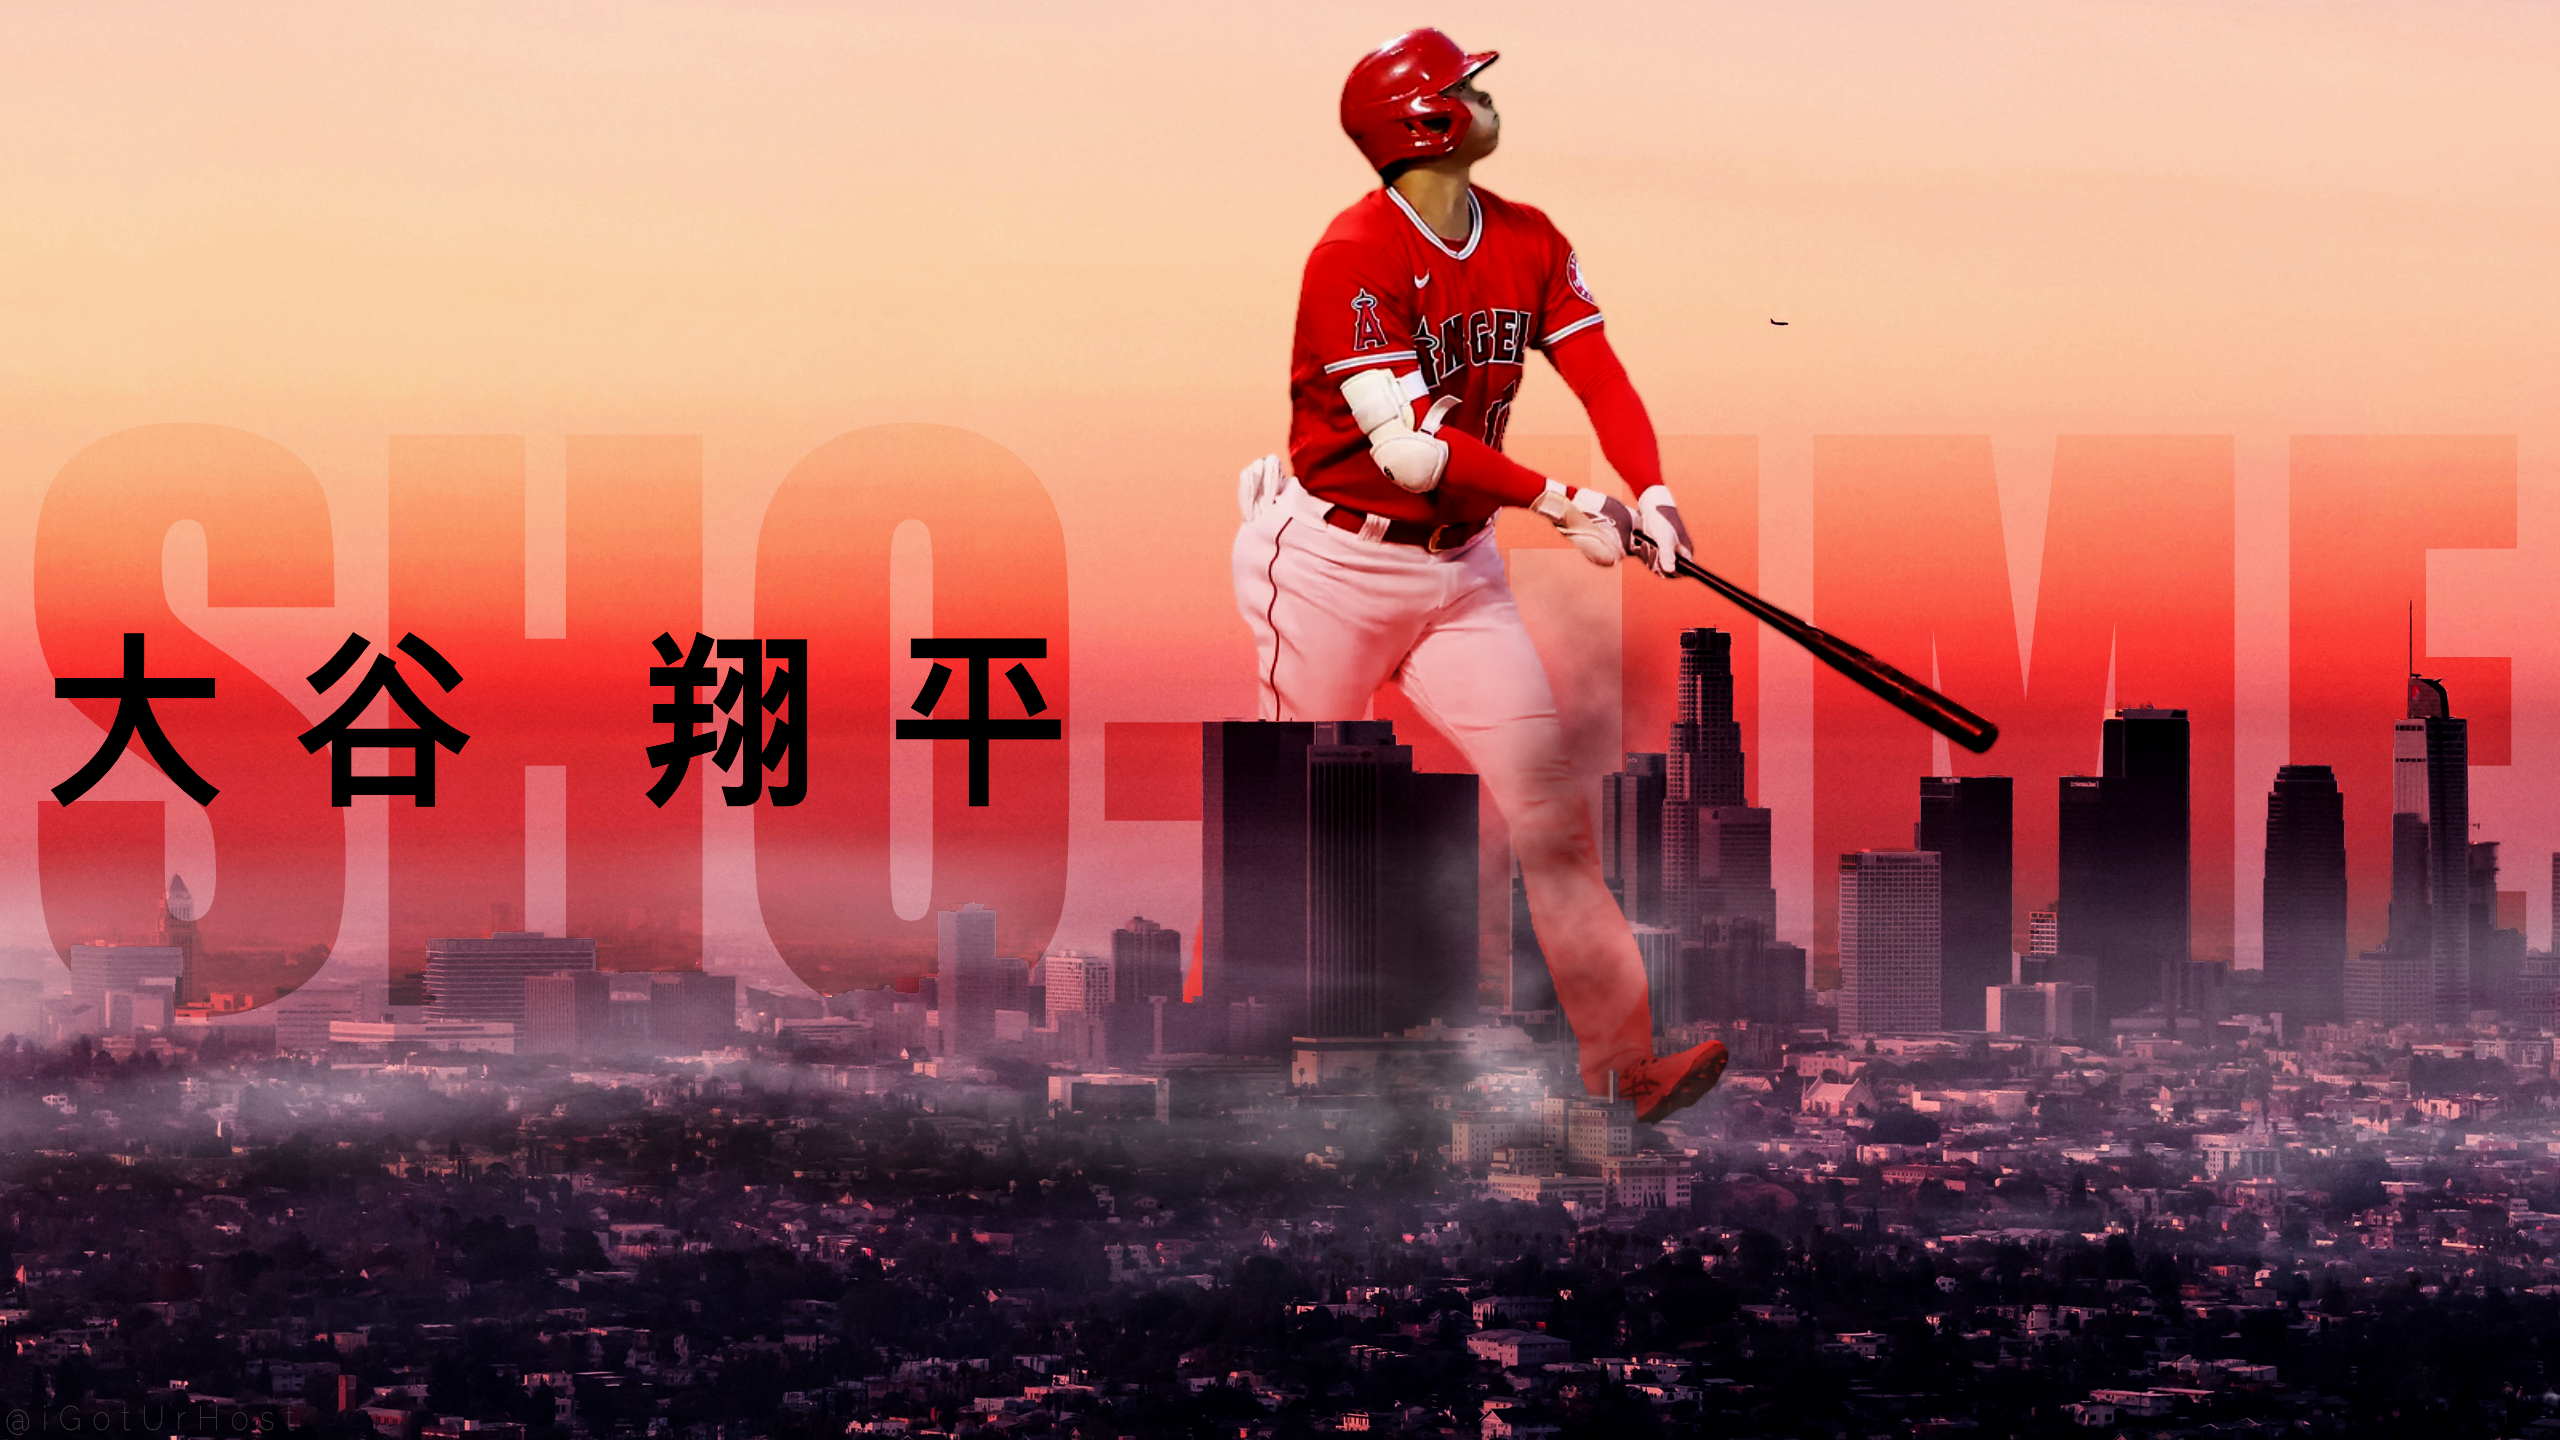 shohei ohtani iPhone Wallpapers Free Download